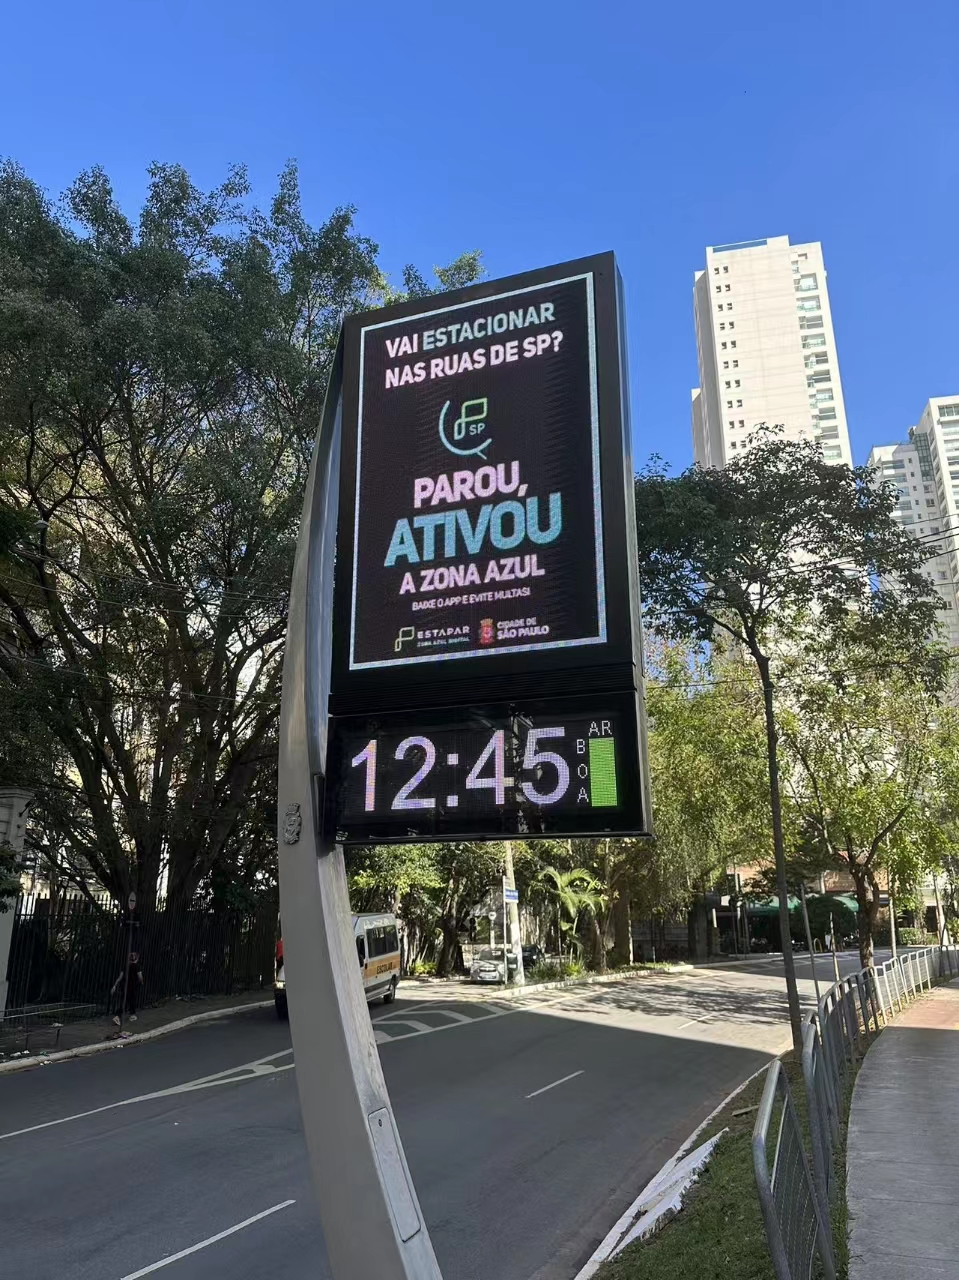 86inch outdoor lcd pole display installed in Brazil